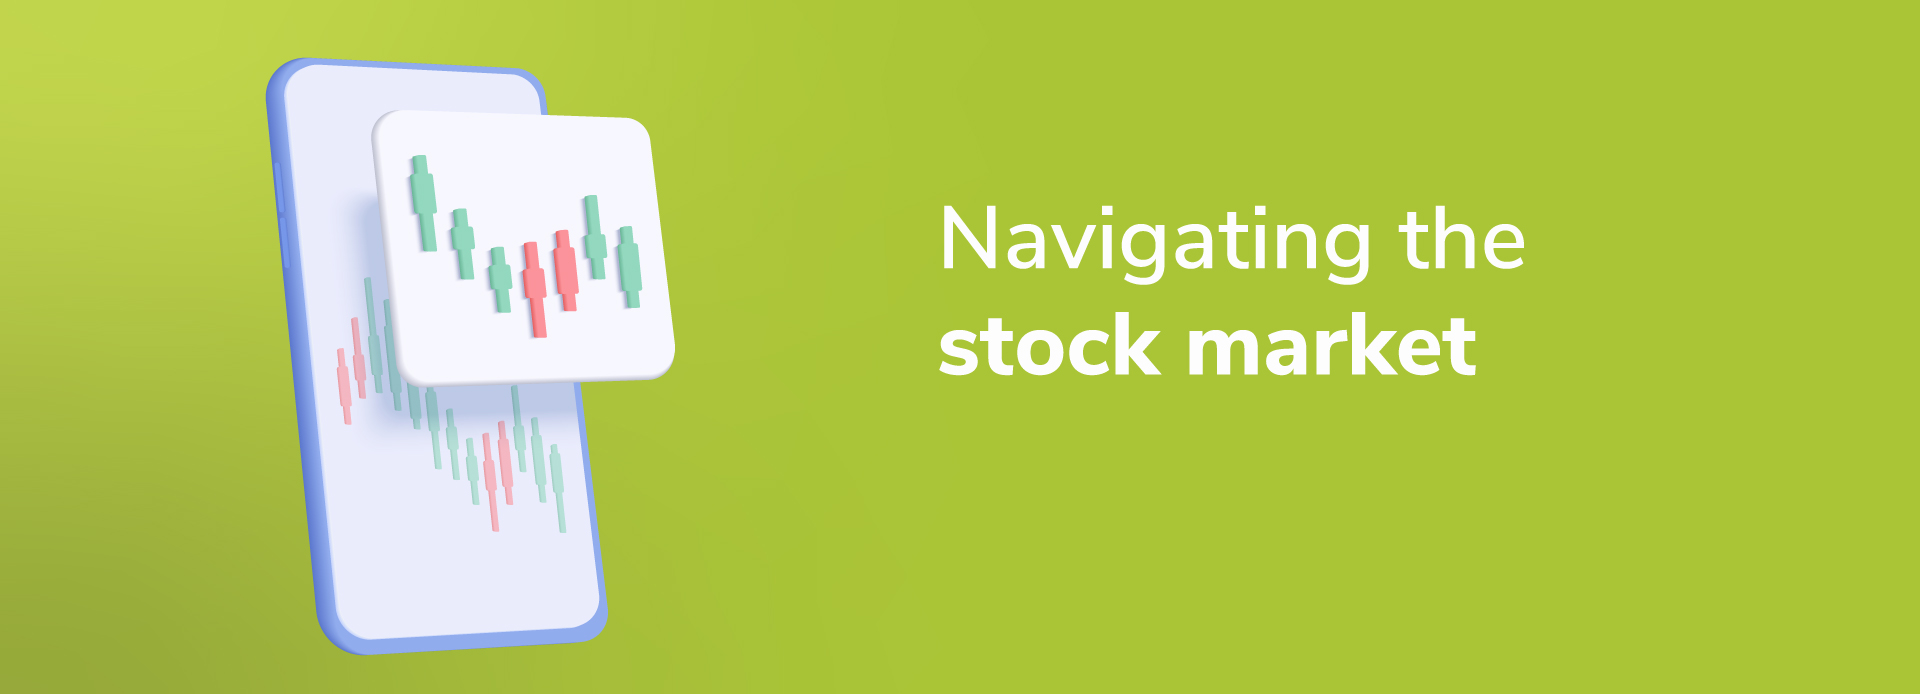 Navigating the stock market: 5 crucial tips to successful investing